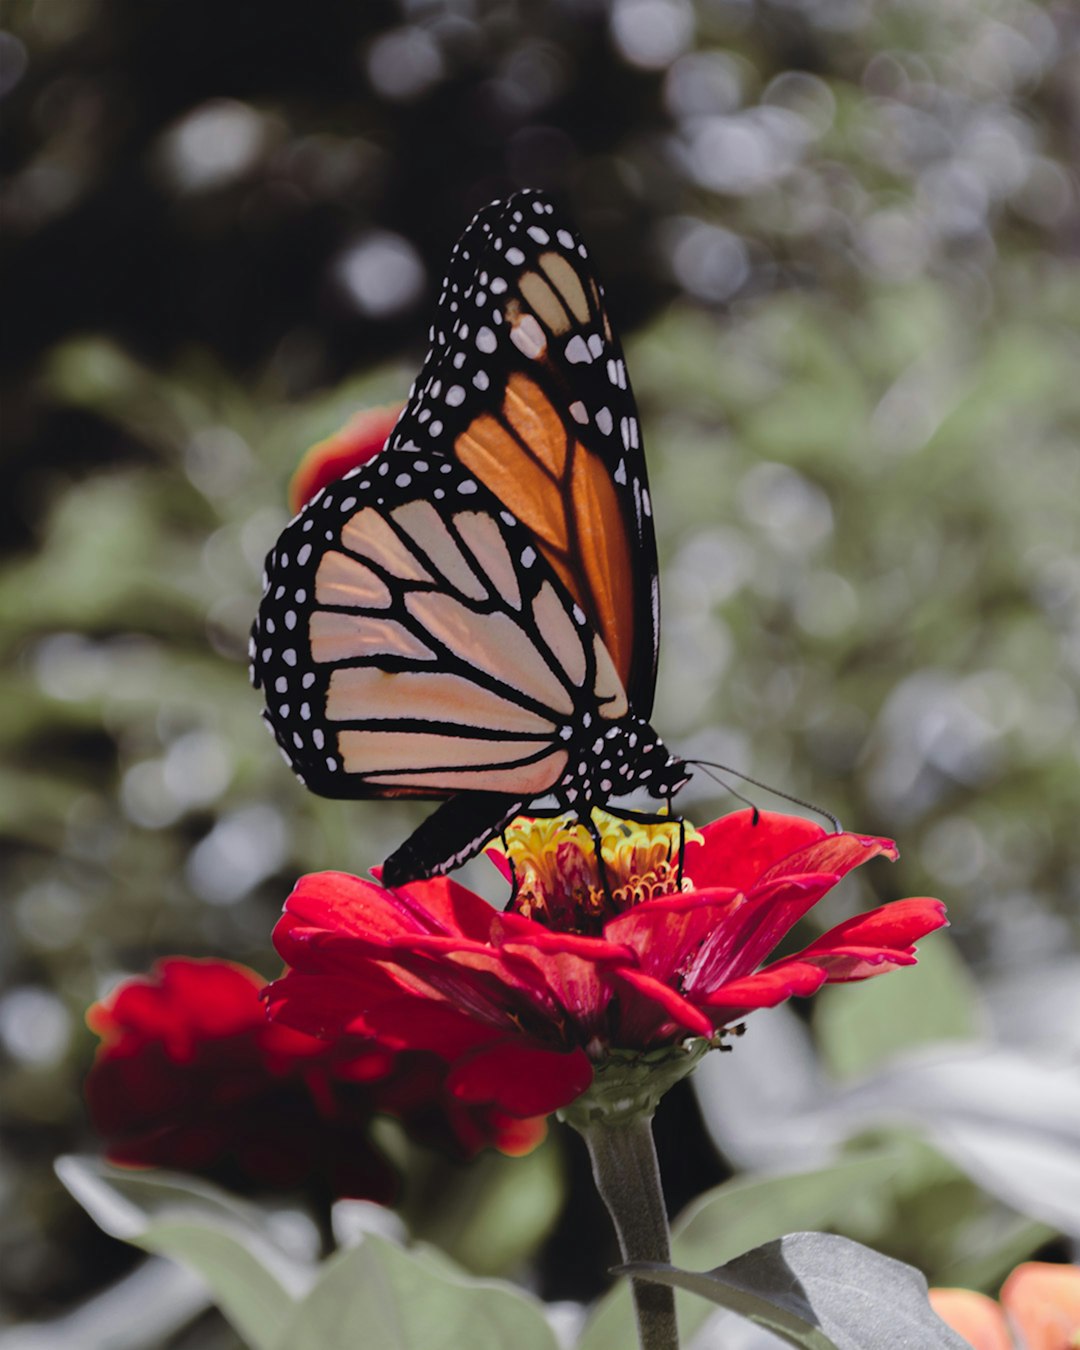 monarch butterfly perched on red flower in close up photography during daytime